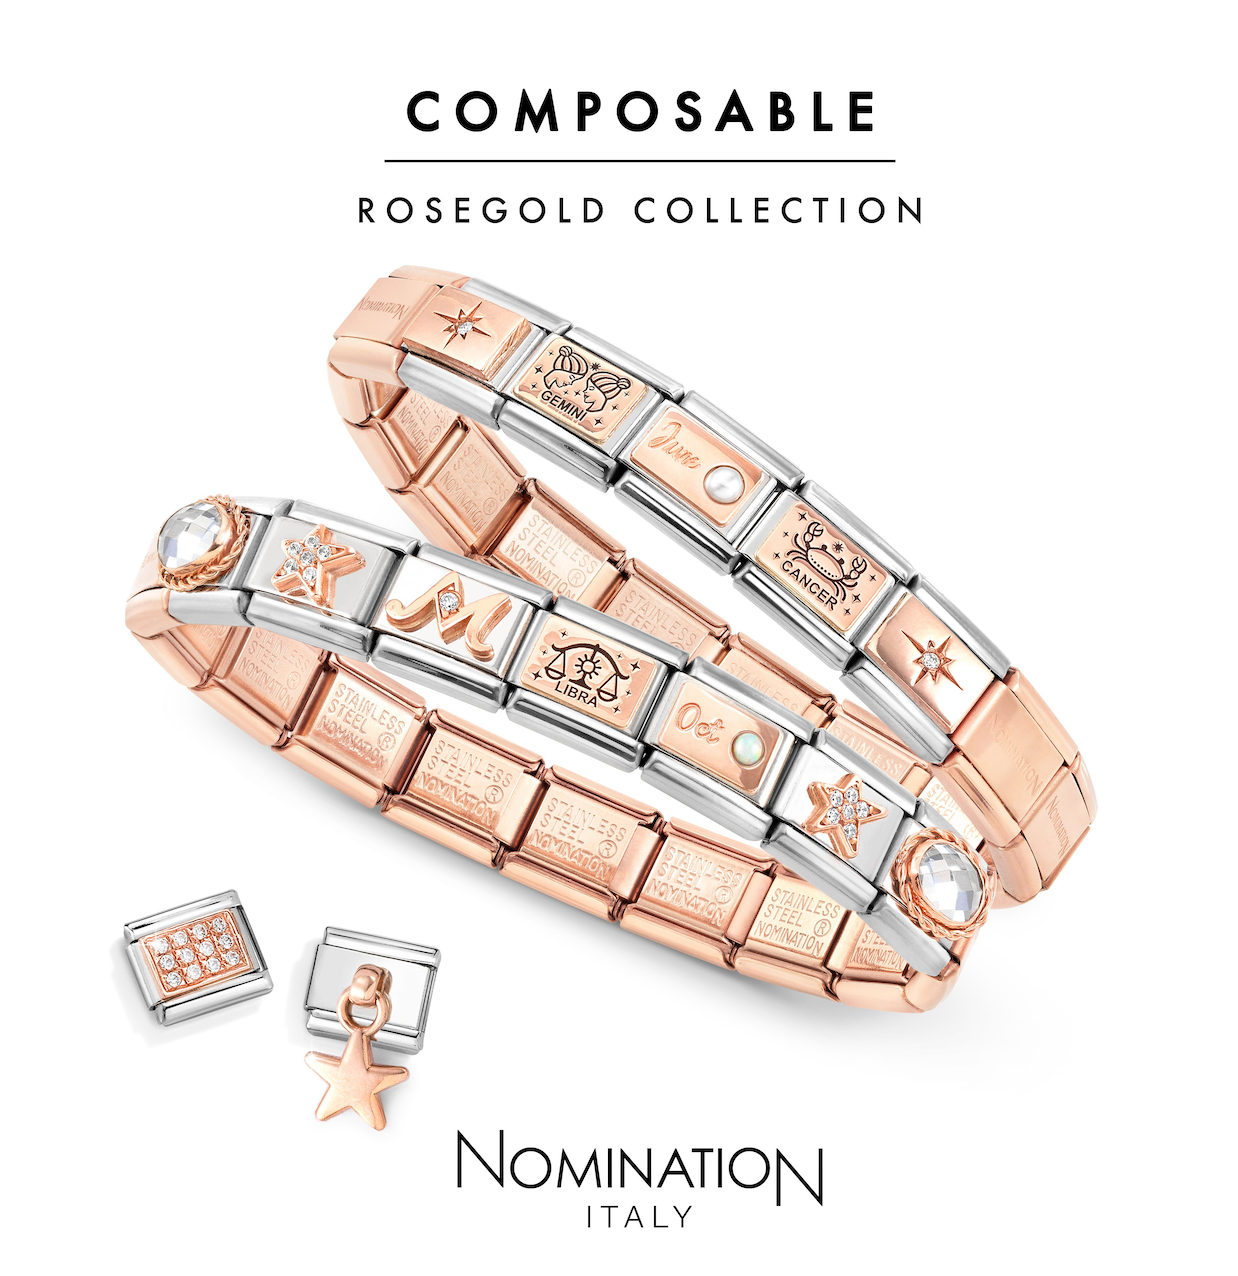 Rose Gold Nomination Composable Charms & Links